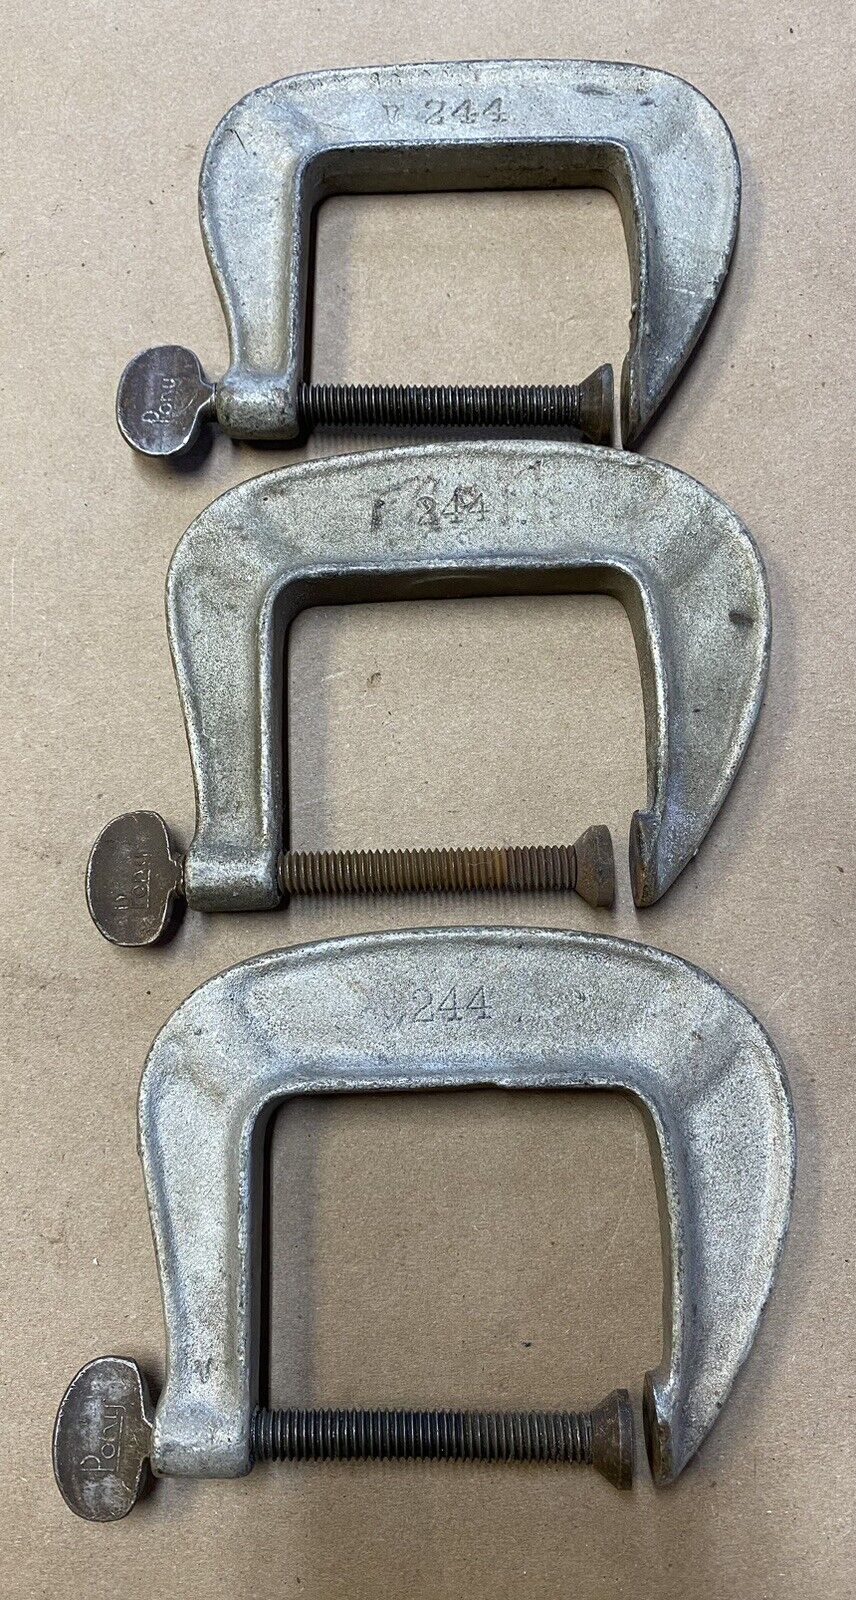 Pony 244 C Clamp Set of 3 (Made in USA) Pre-Owned